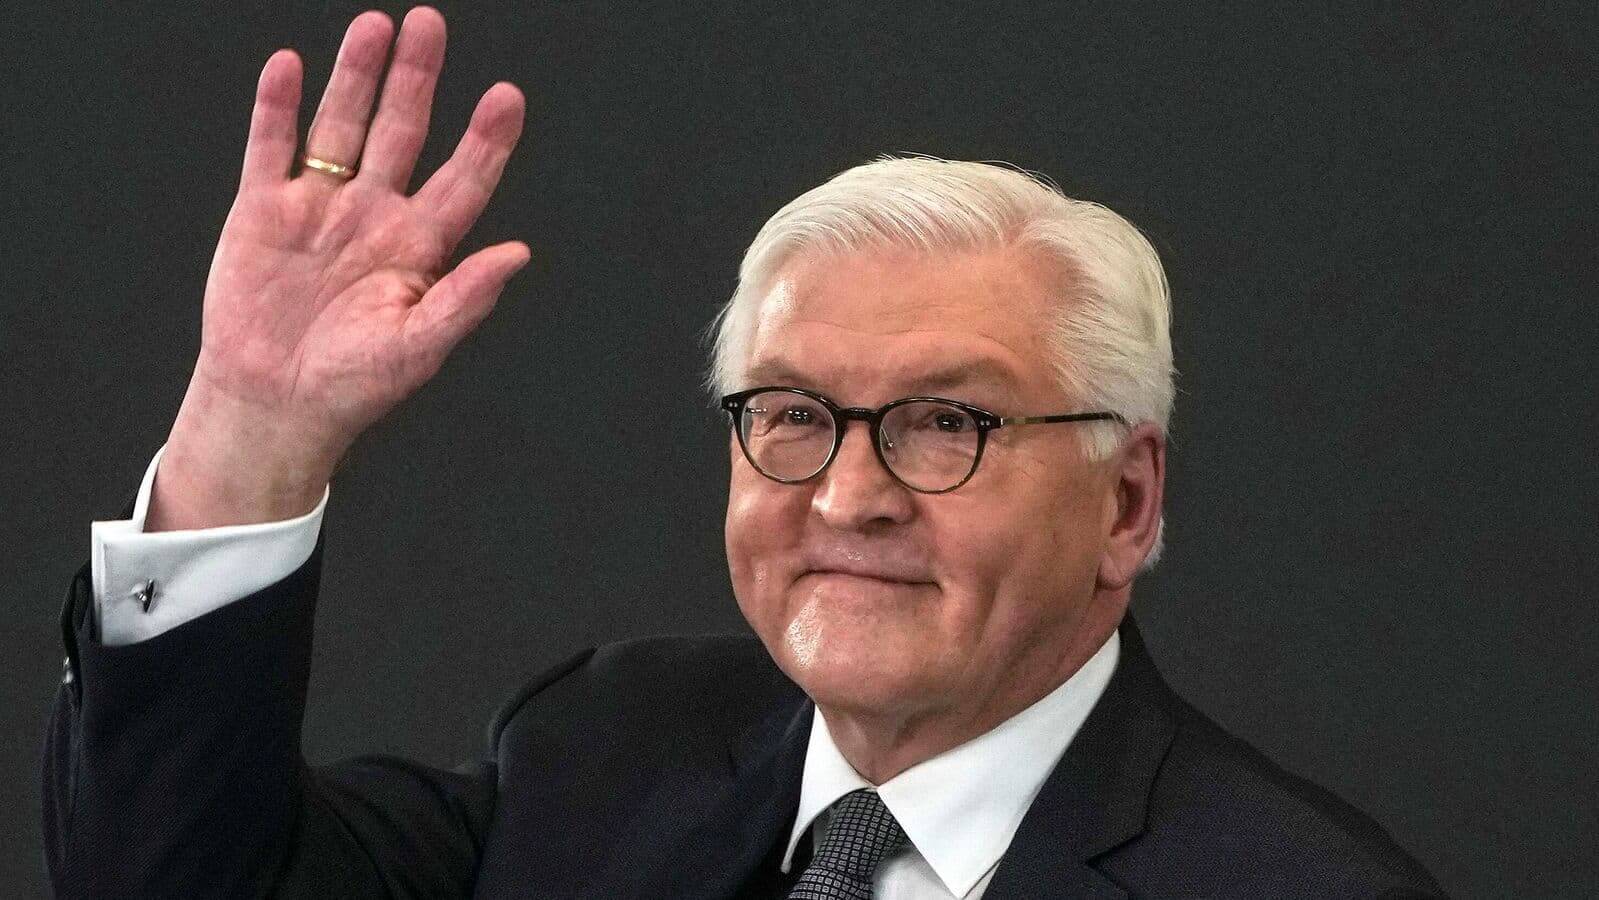 Steinmeier Re-Elected as German President, Vows to Defend Democracy, Defeat COVID-19